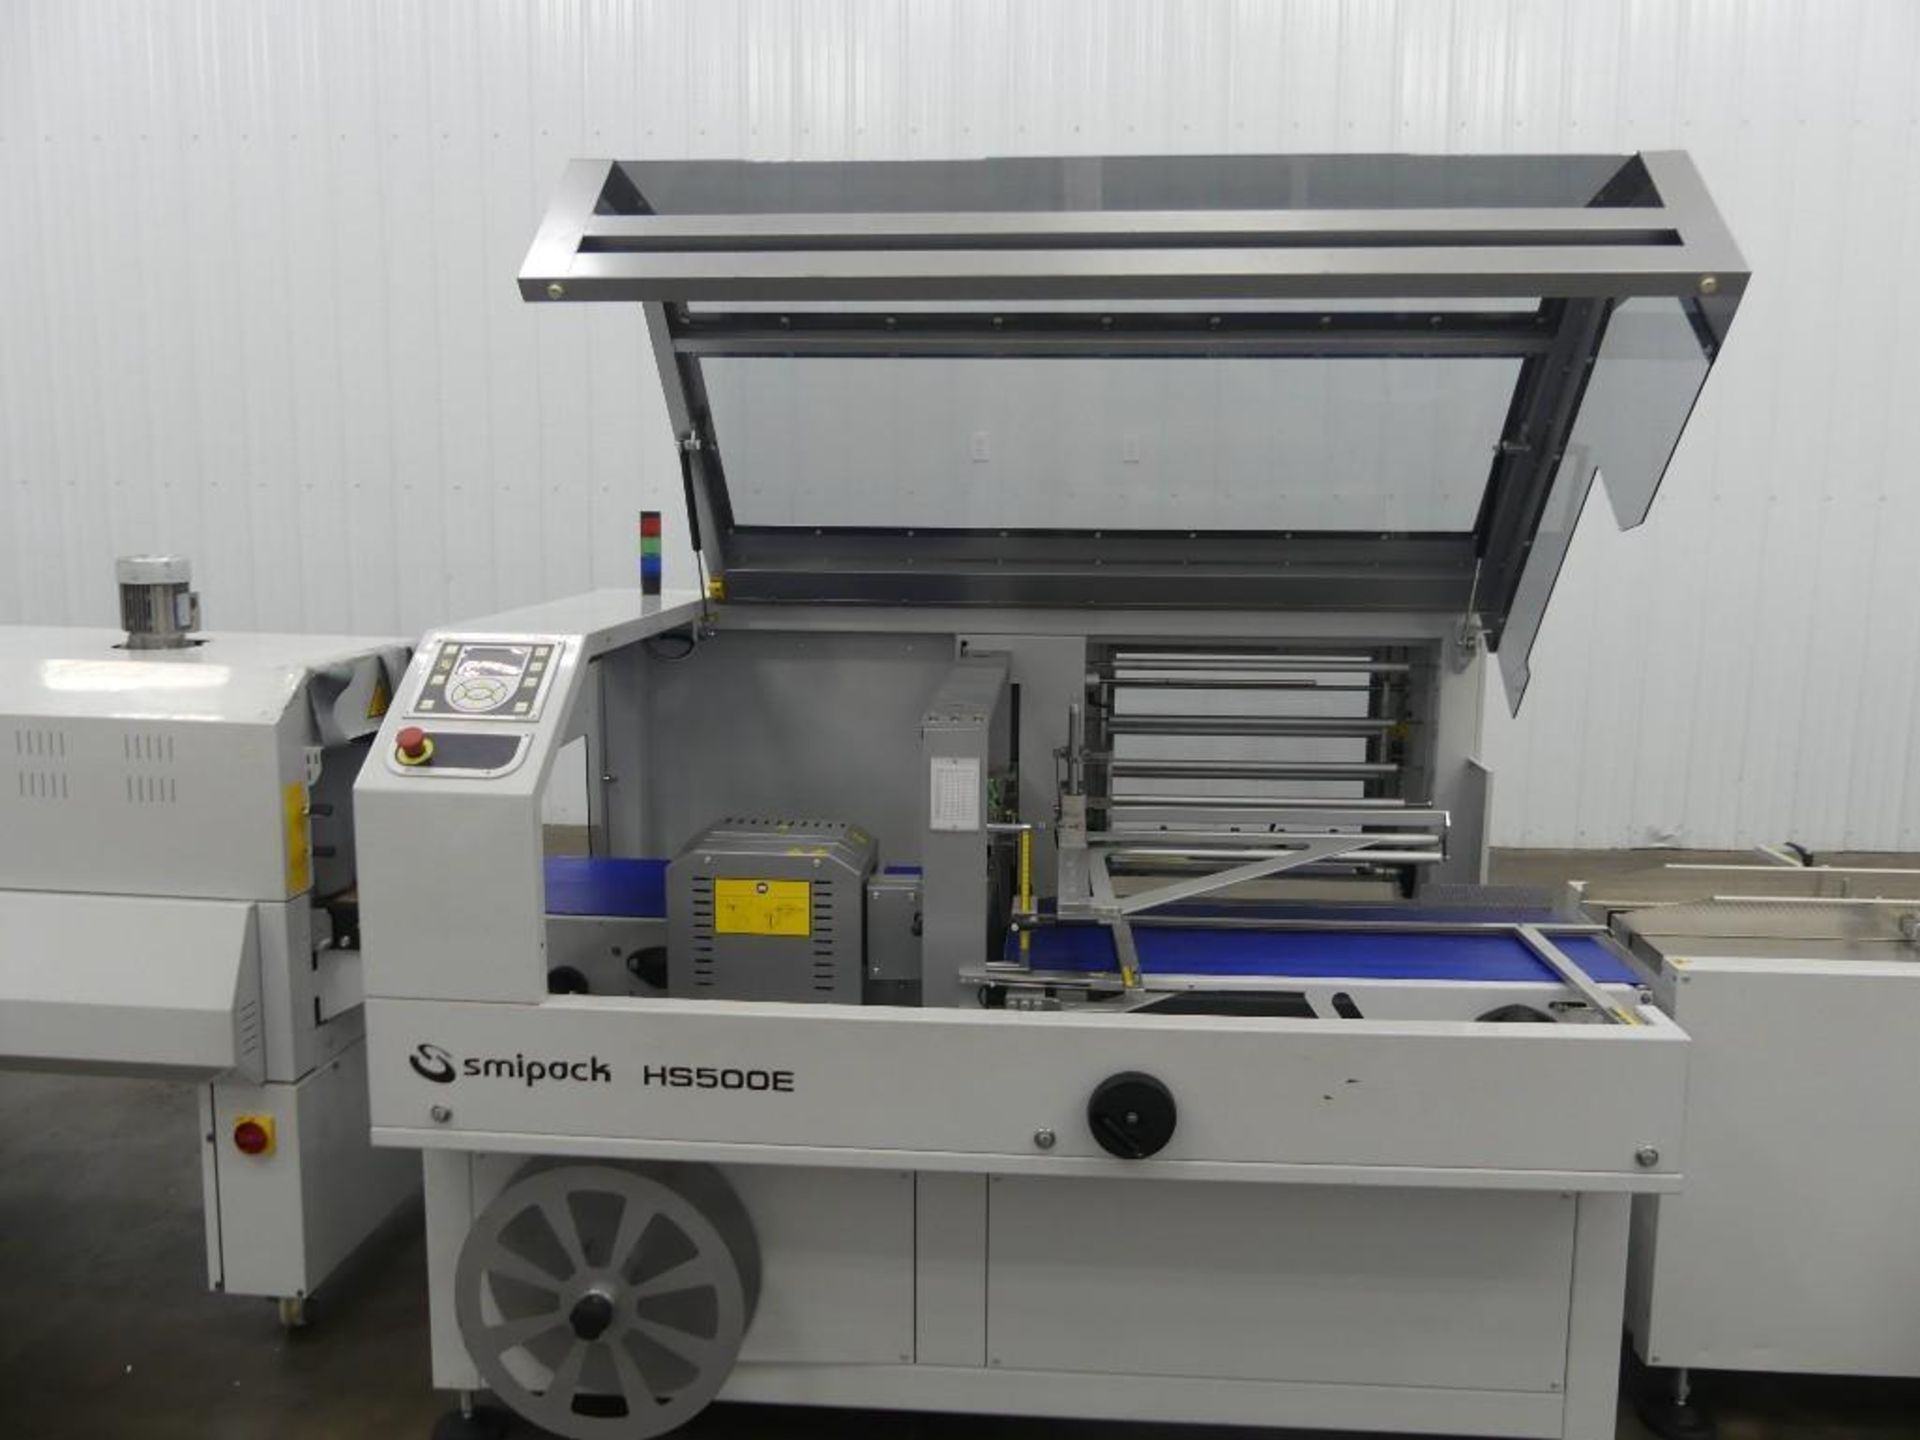 Smipack HS500E Automatic Side Sealer with Infeed and Shrink Tunnel - Image 13 of 76